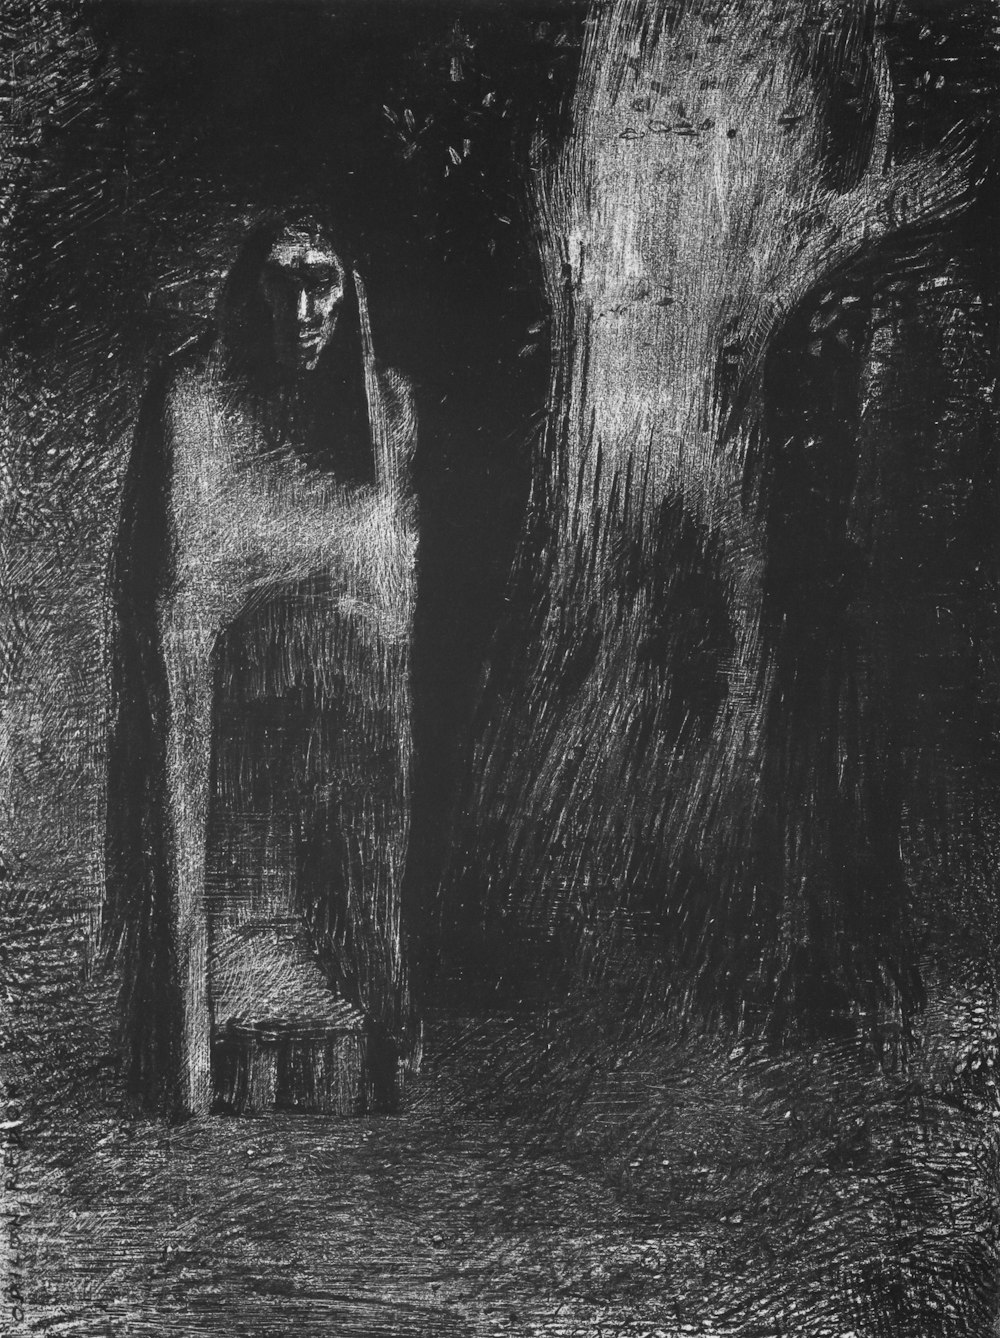 a black and white drawing of a person standing in a cave